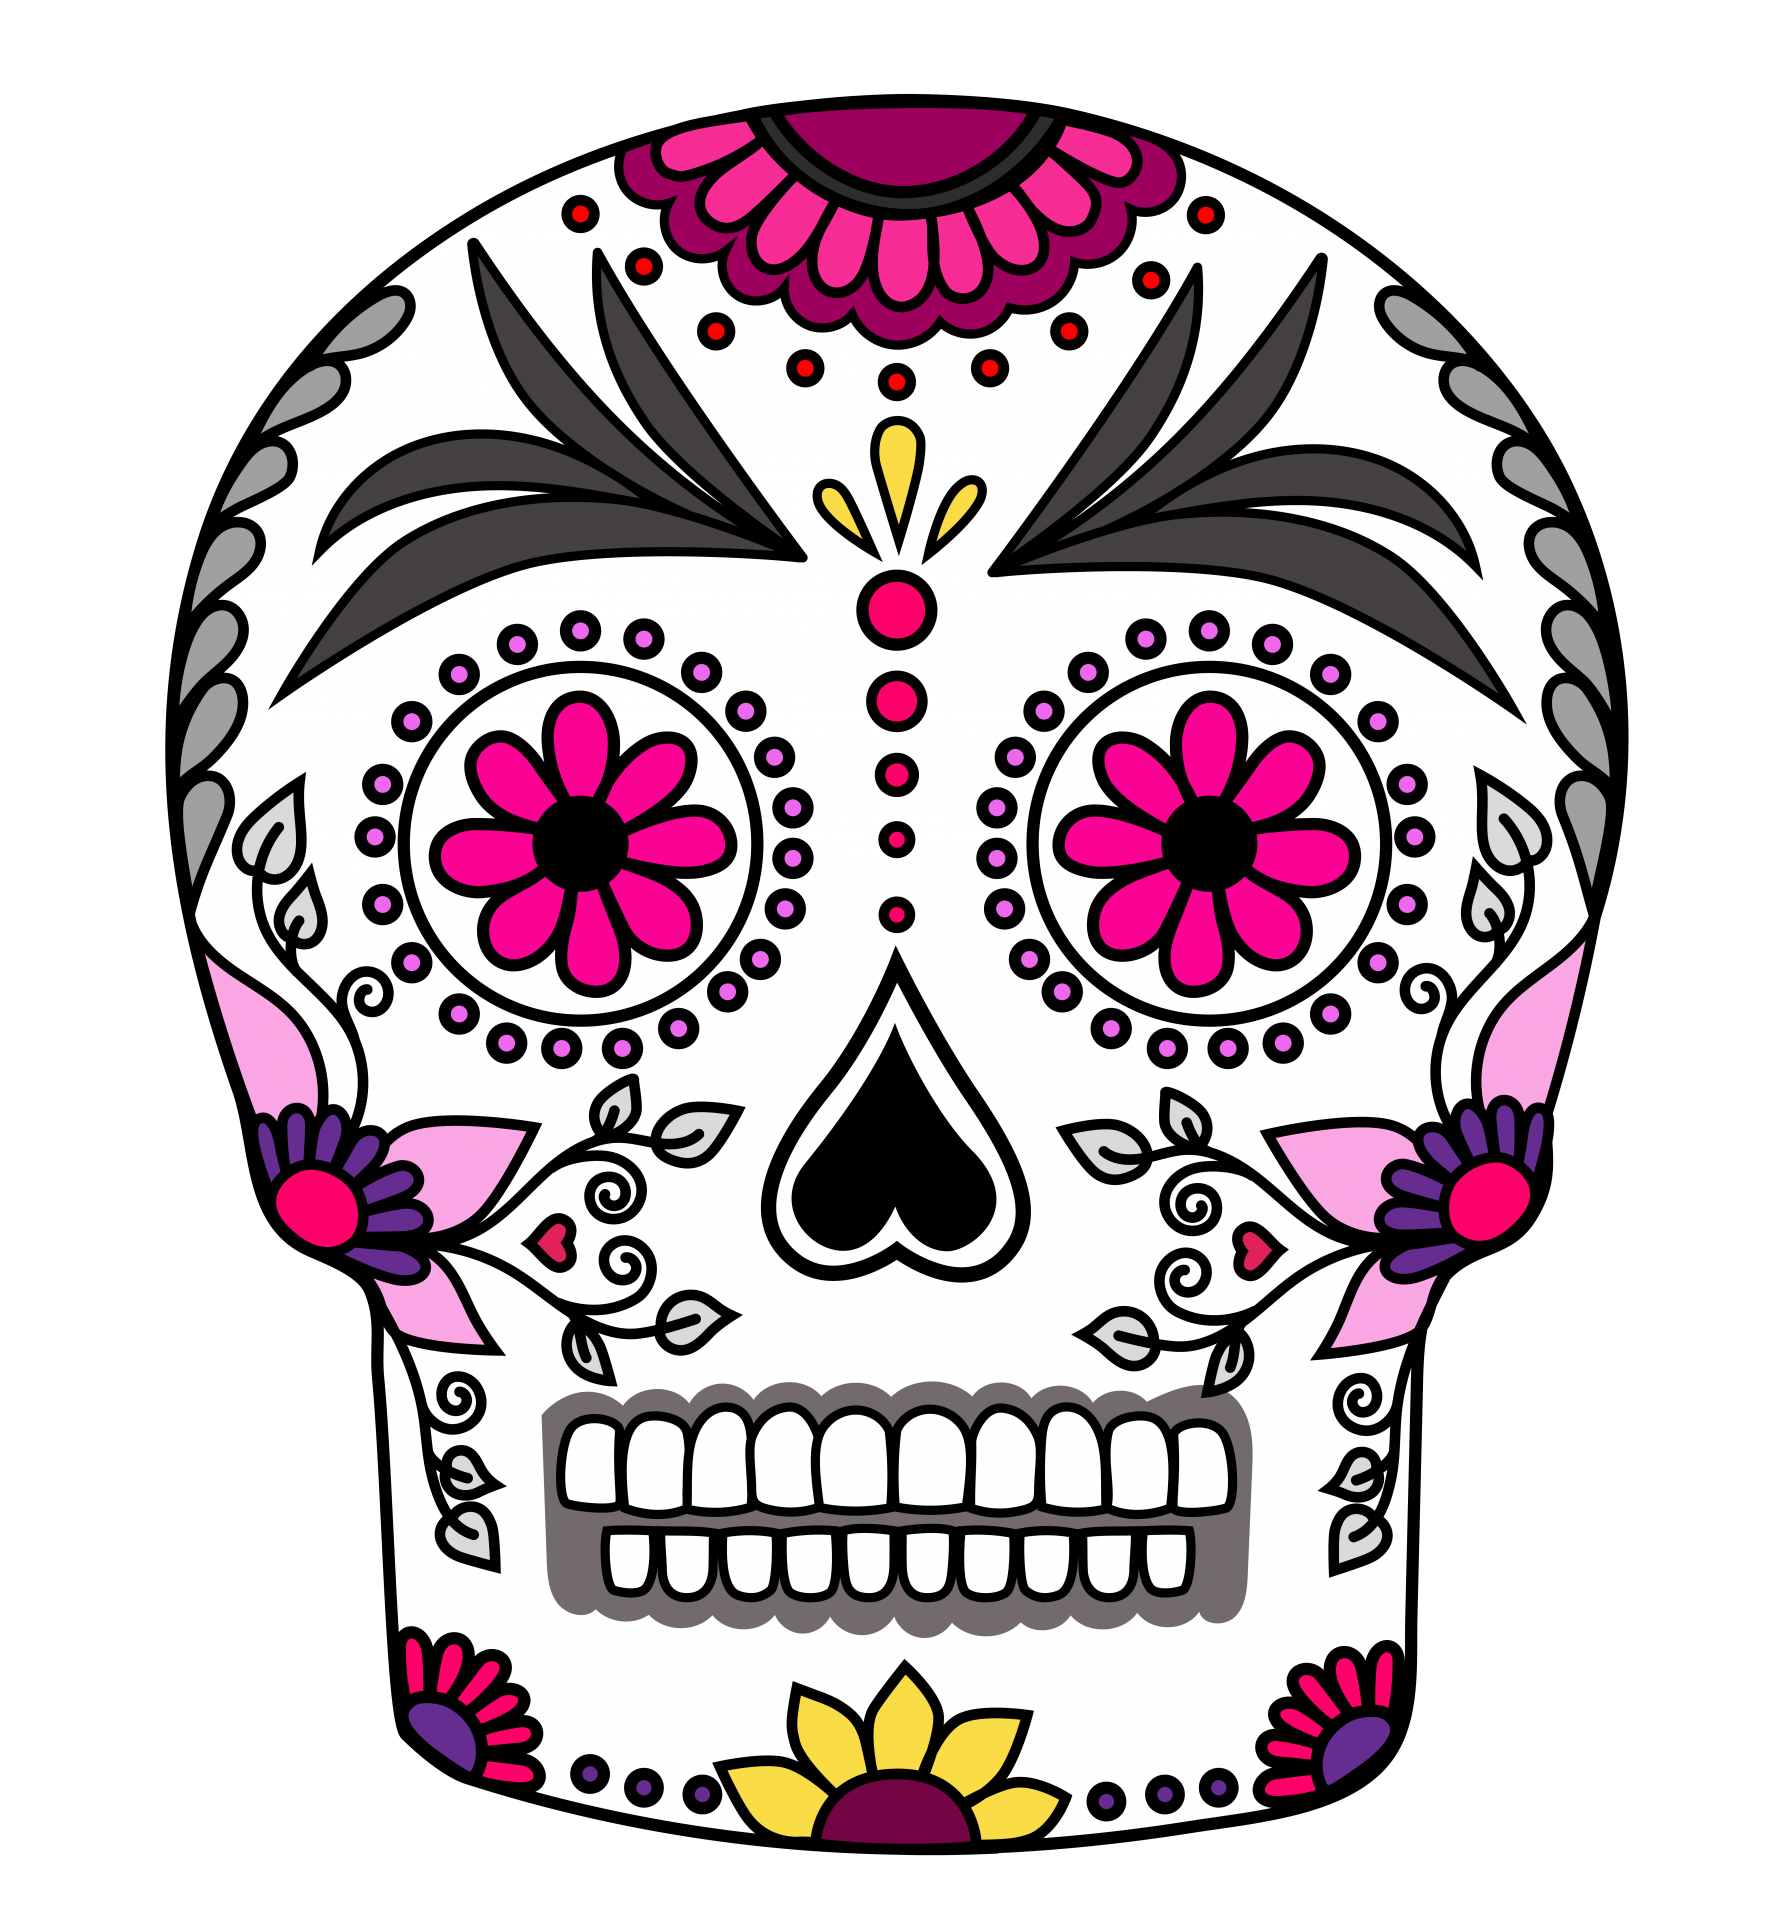 day-of-the-dead-skull-free-stock-photo-public-domain-pictures